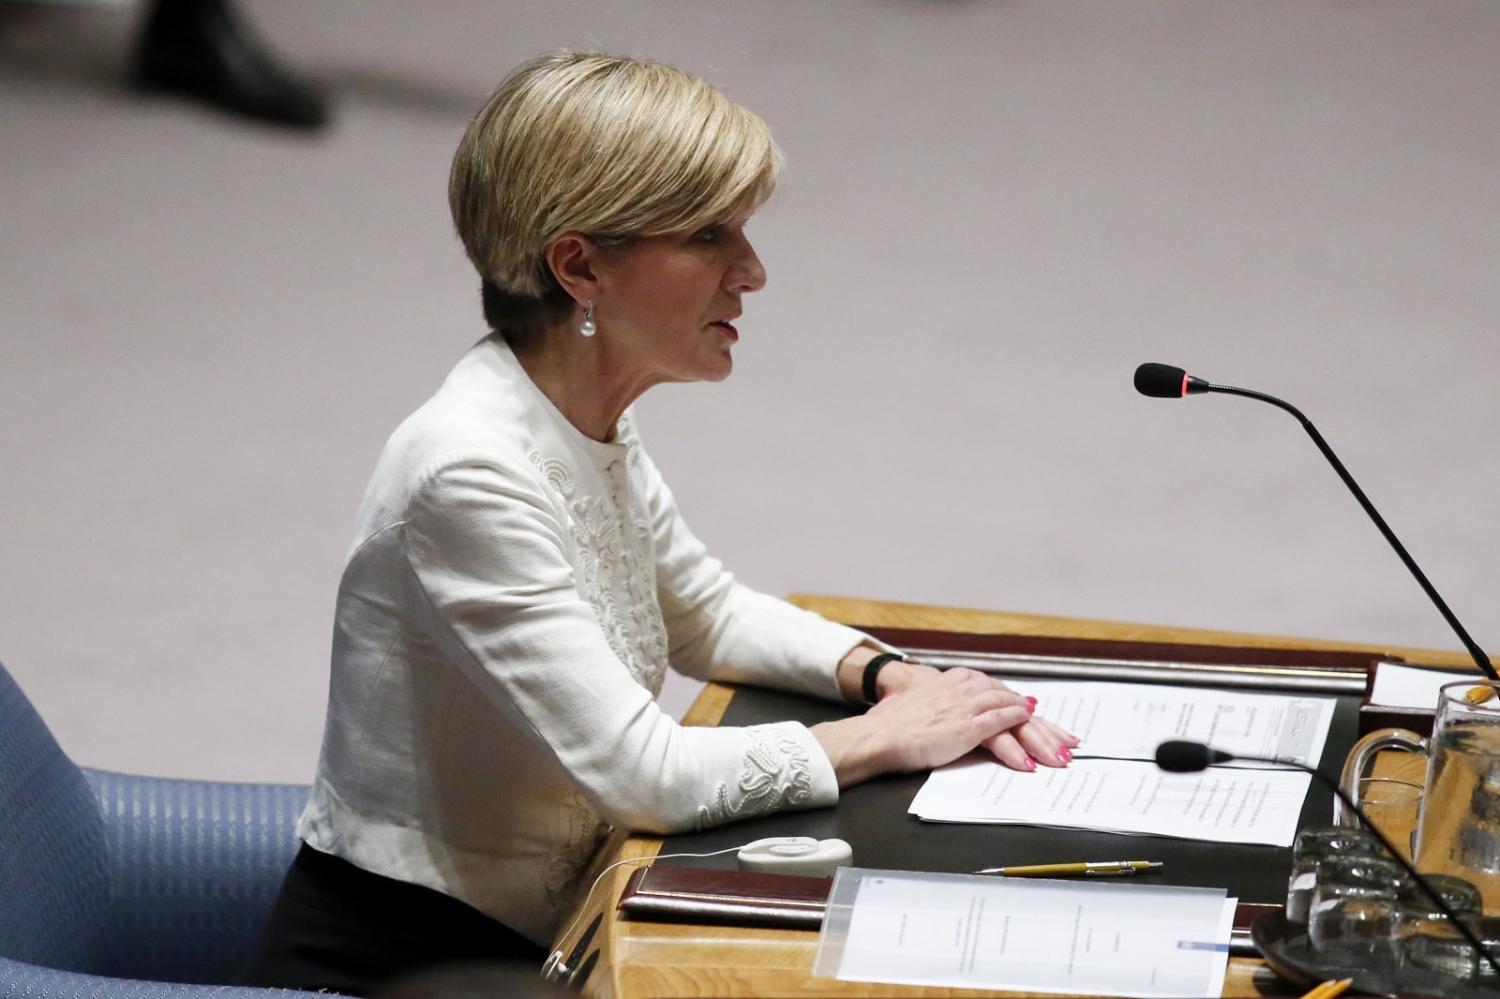 As then Australian foreign minister, Julie Bishop speaks before the vote on a draft resolution for establishing a tribunal to prosecute those responsible for the downing of flight MH17, UN Headquarters (Kena Betancur/AFP via Getty Images)